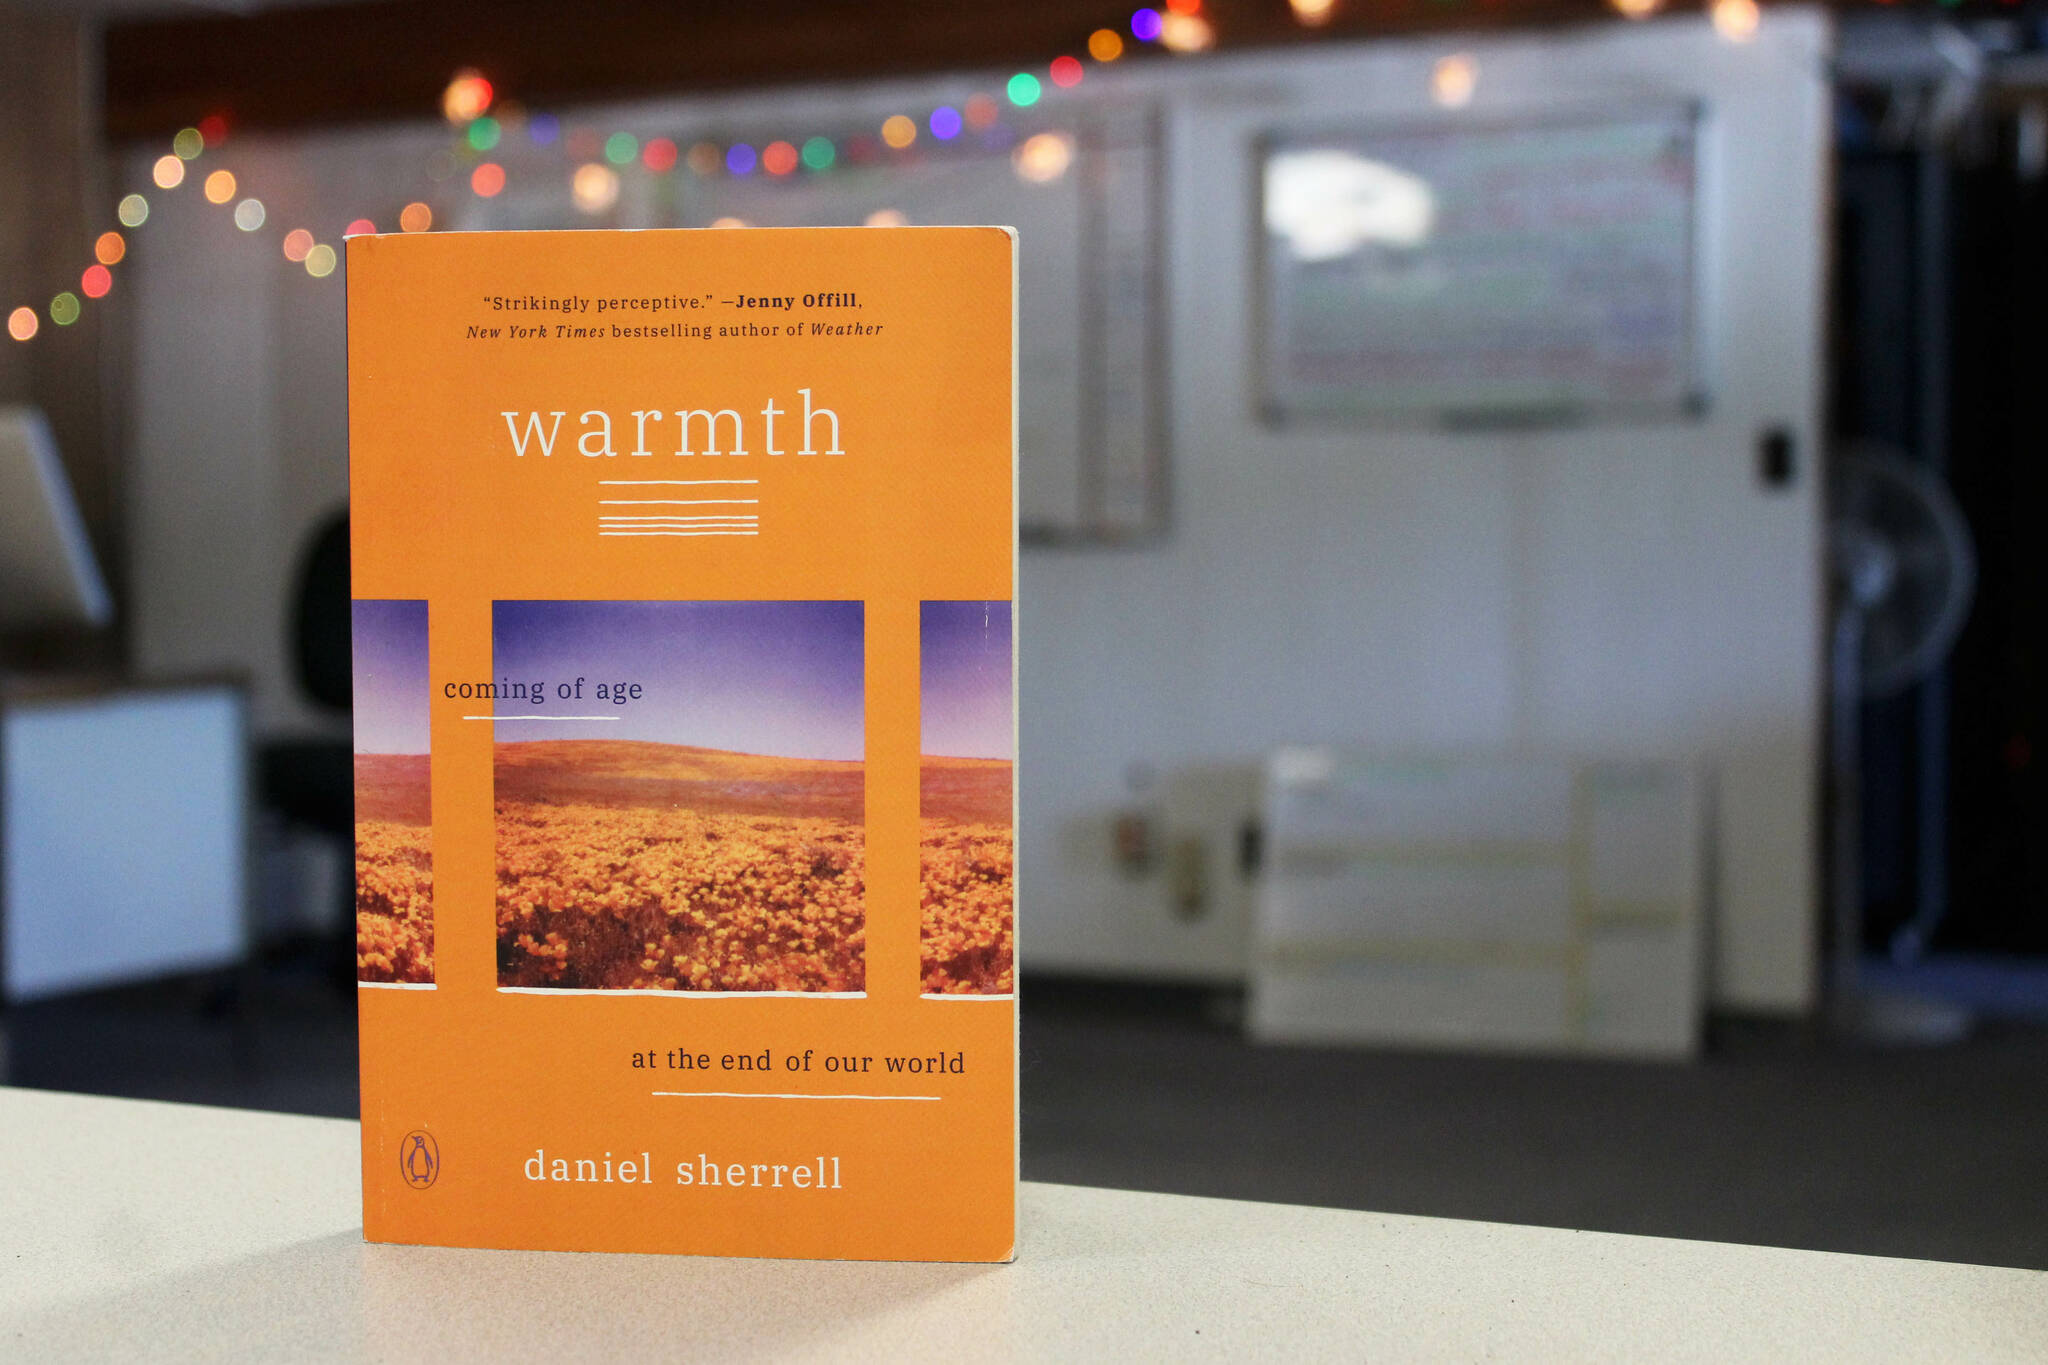 A copy of Daniel Sherrell’s “Warmth: Coming of Age at the End of our World” sits on a desk in the Peninsula Clarion building on Thursday March 30, 2023, in Kenai, Alaska. (Ashlyn O’Hara/Peninsula Clarion)